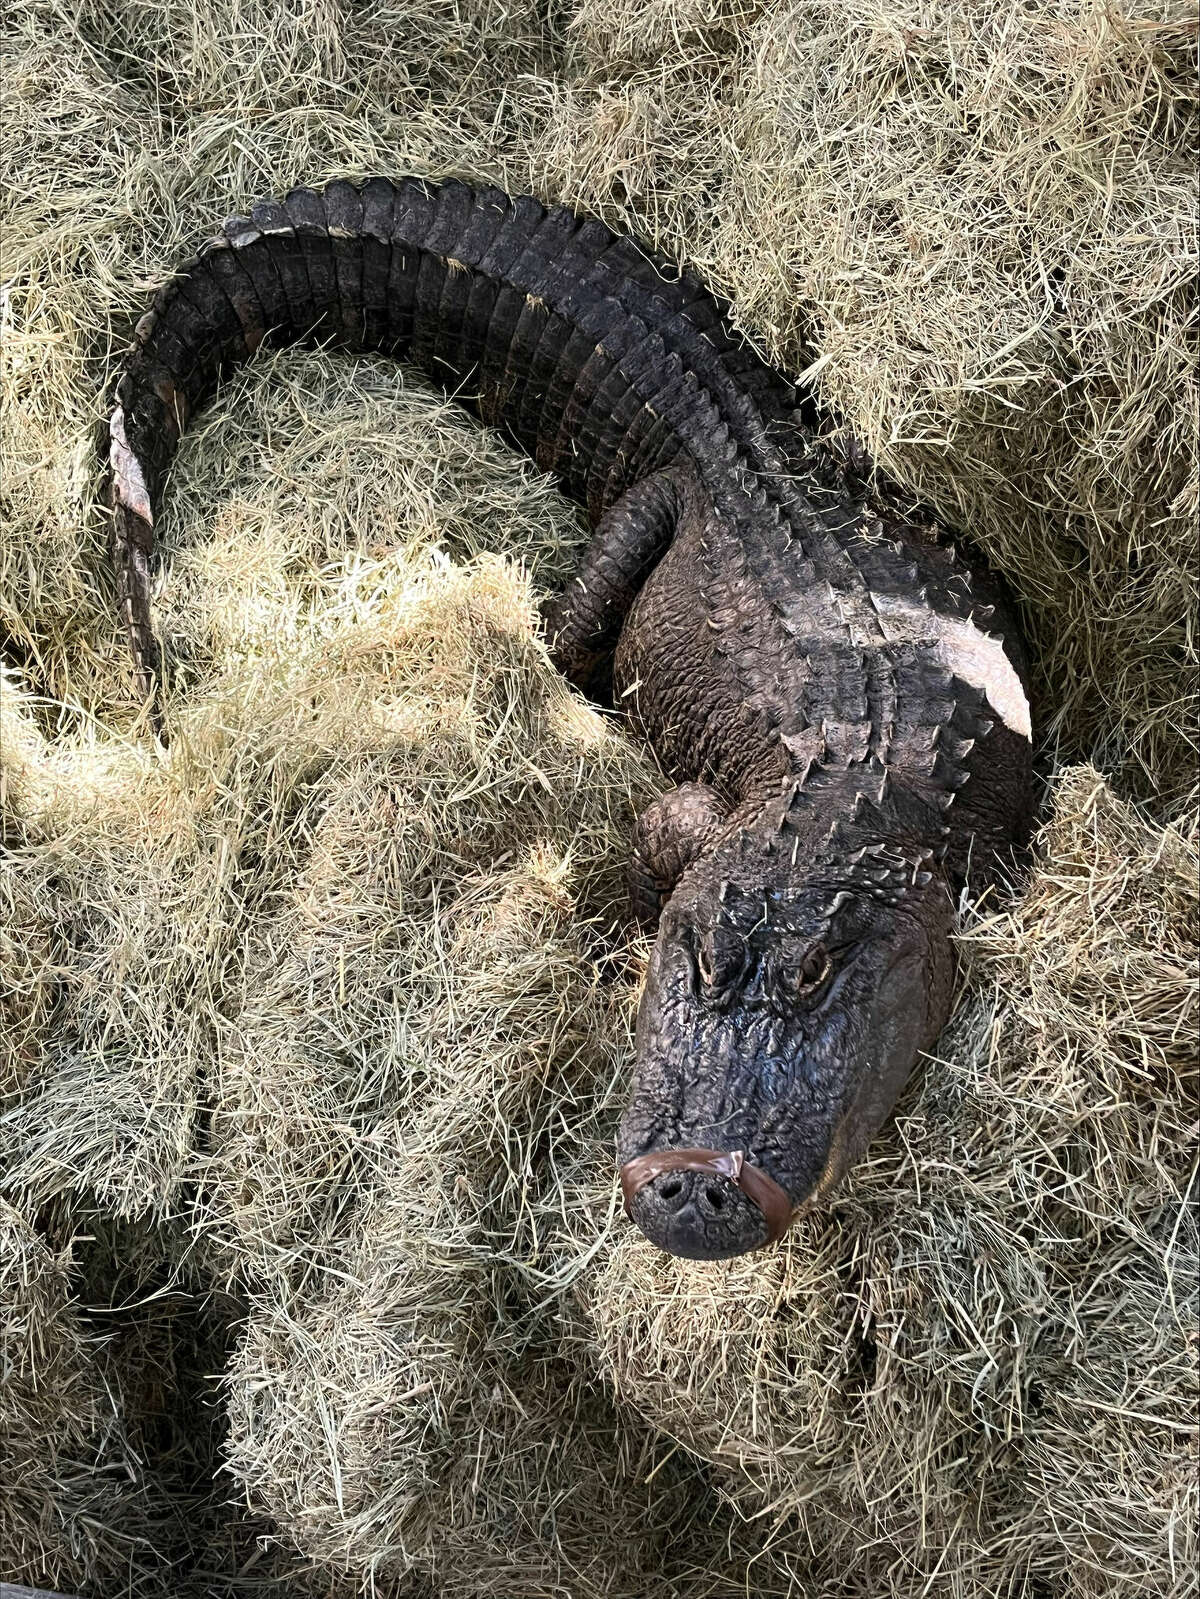 A Texas Parks and Wildlife officials found this alligator, named Tewa, in a Crawford County backyard and learned a woman had been keeping it as a pet for 20 years.